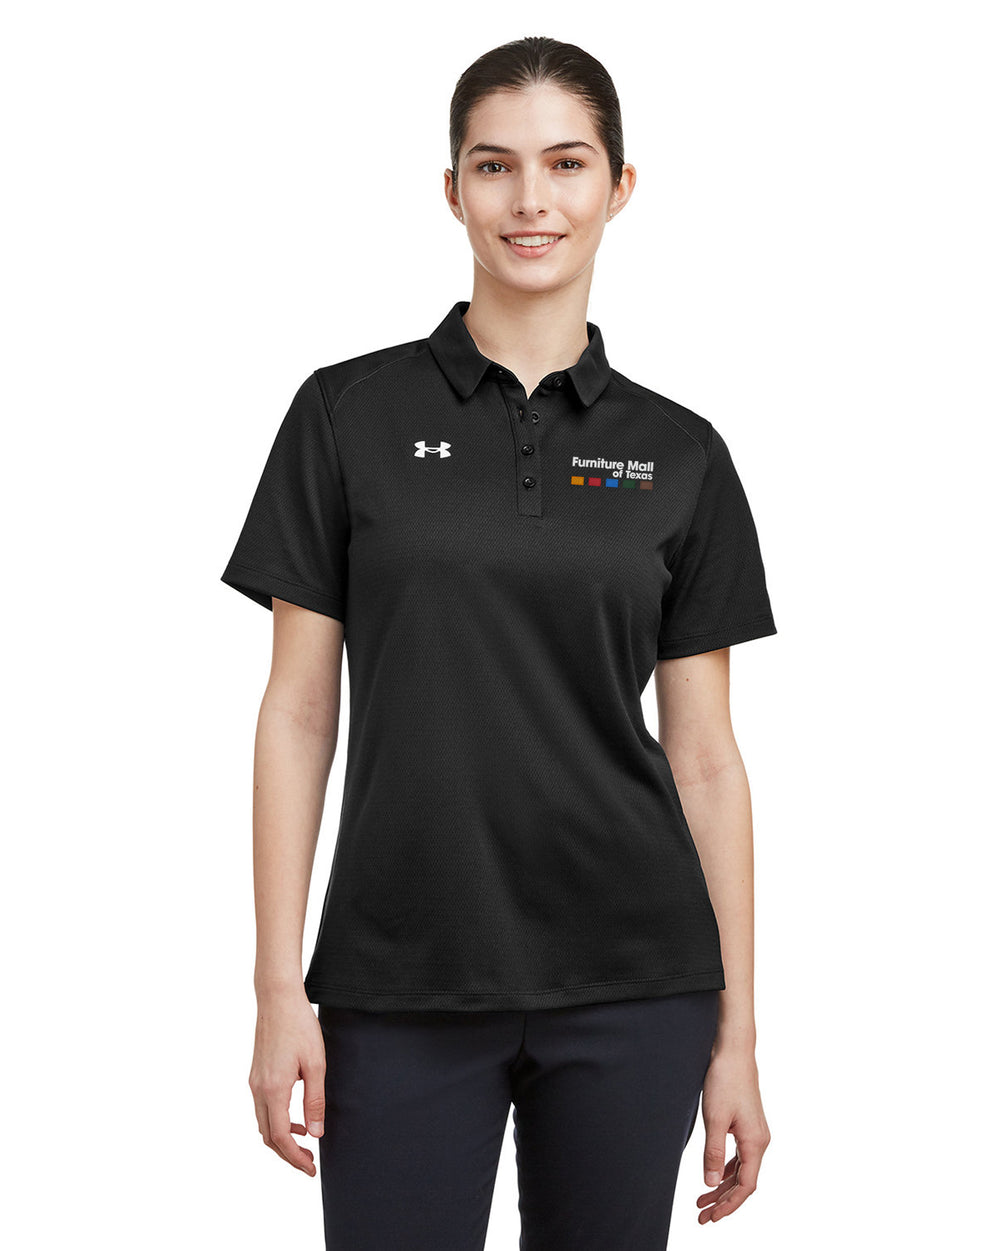 Furniture Mall of Texas - Under Armour Ladies' Tech Polo - 1370431